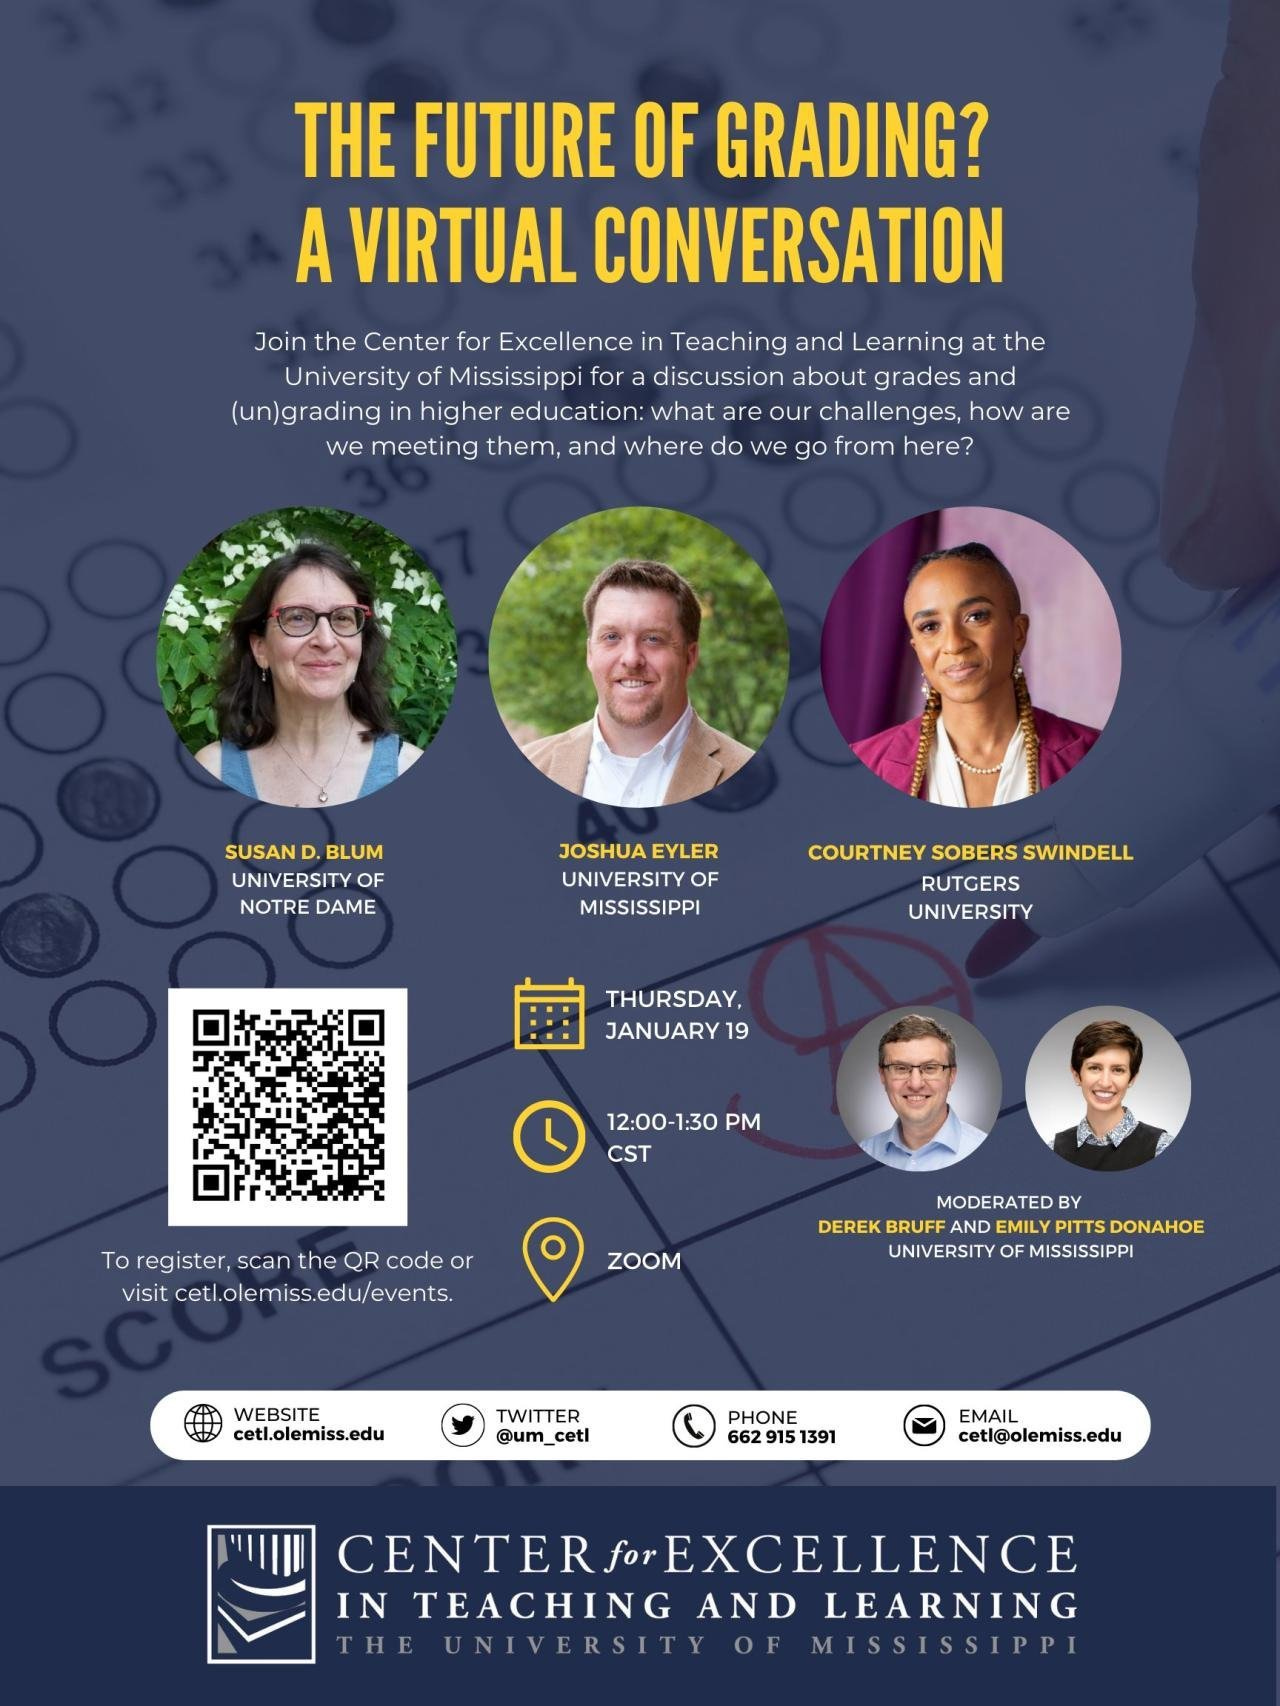 event flyer The Future of Grading? A Virtual Conversation. Panelists Susan Blum, Joshua Eyler, Courtney Sobers Swindell. Moderated by Derek Bruff & Emily Pitts Donahoe. Sponsored by CETL Uni of MI